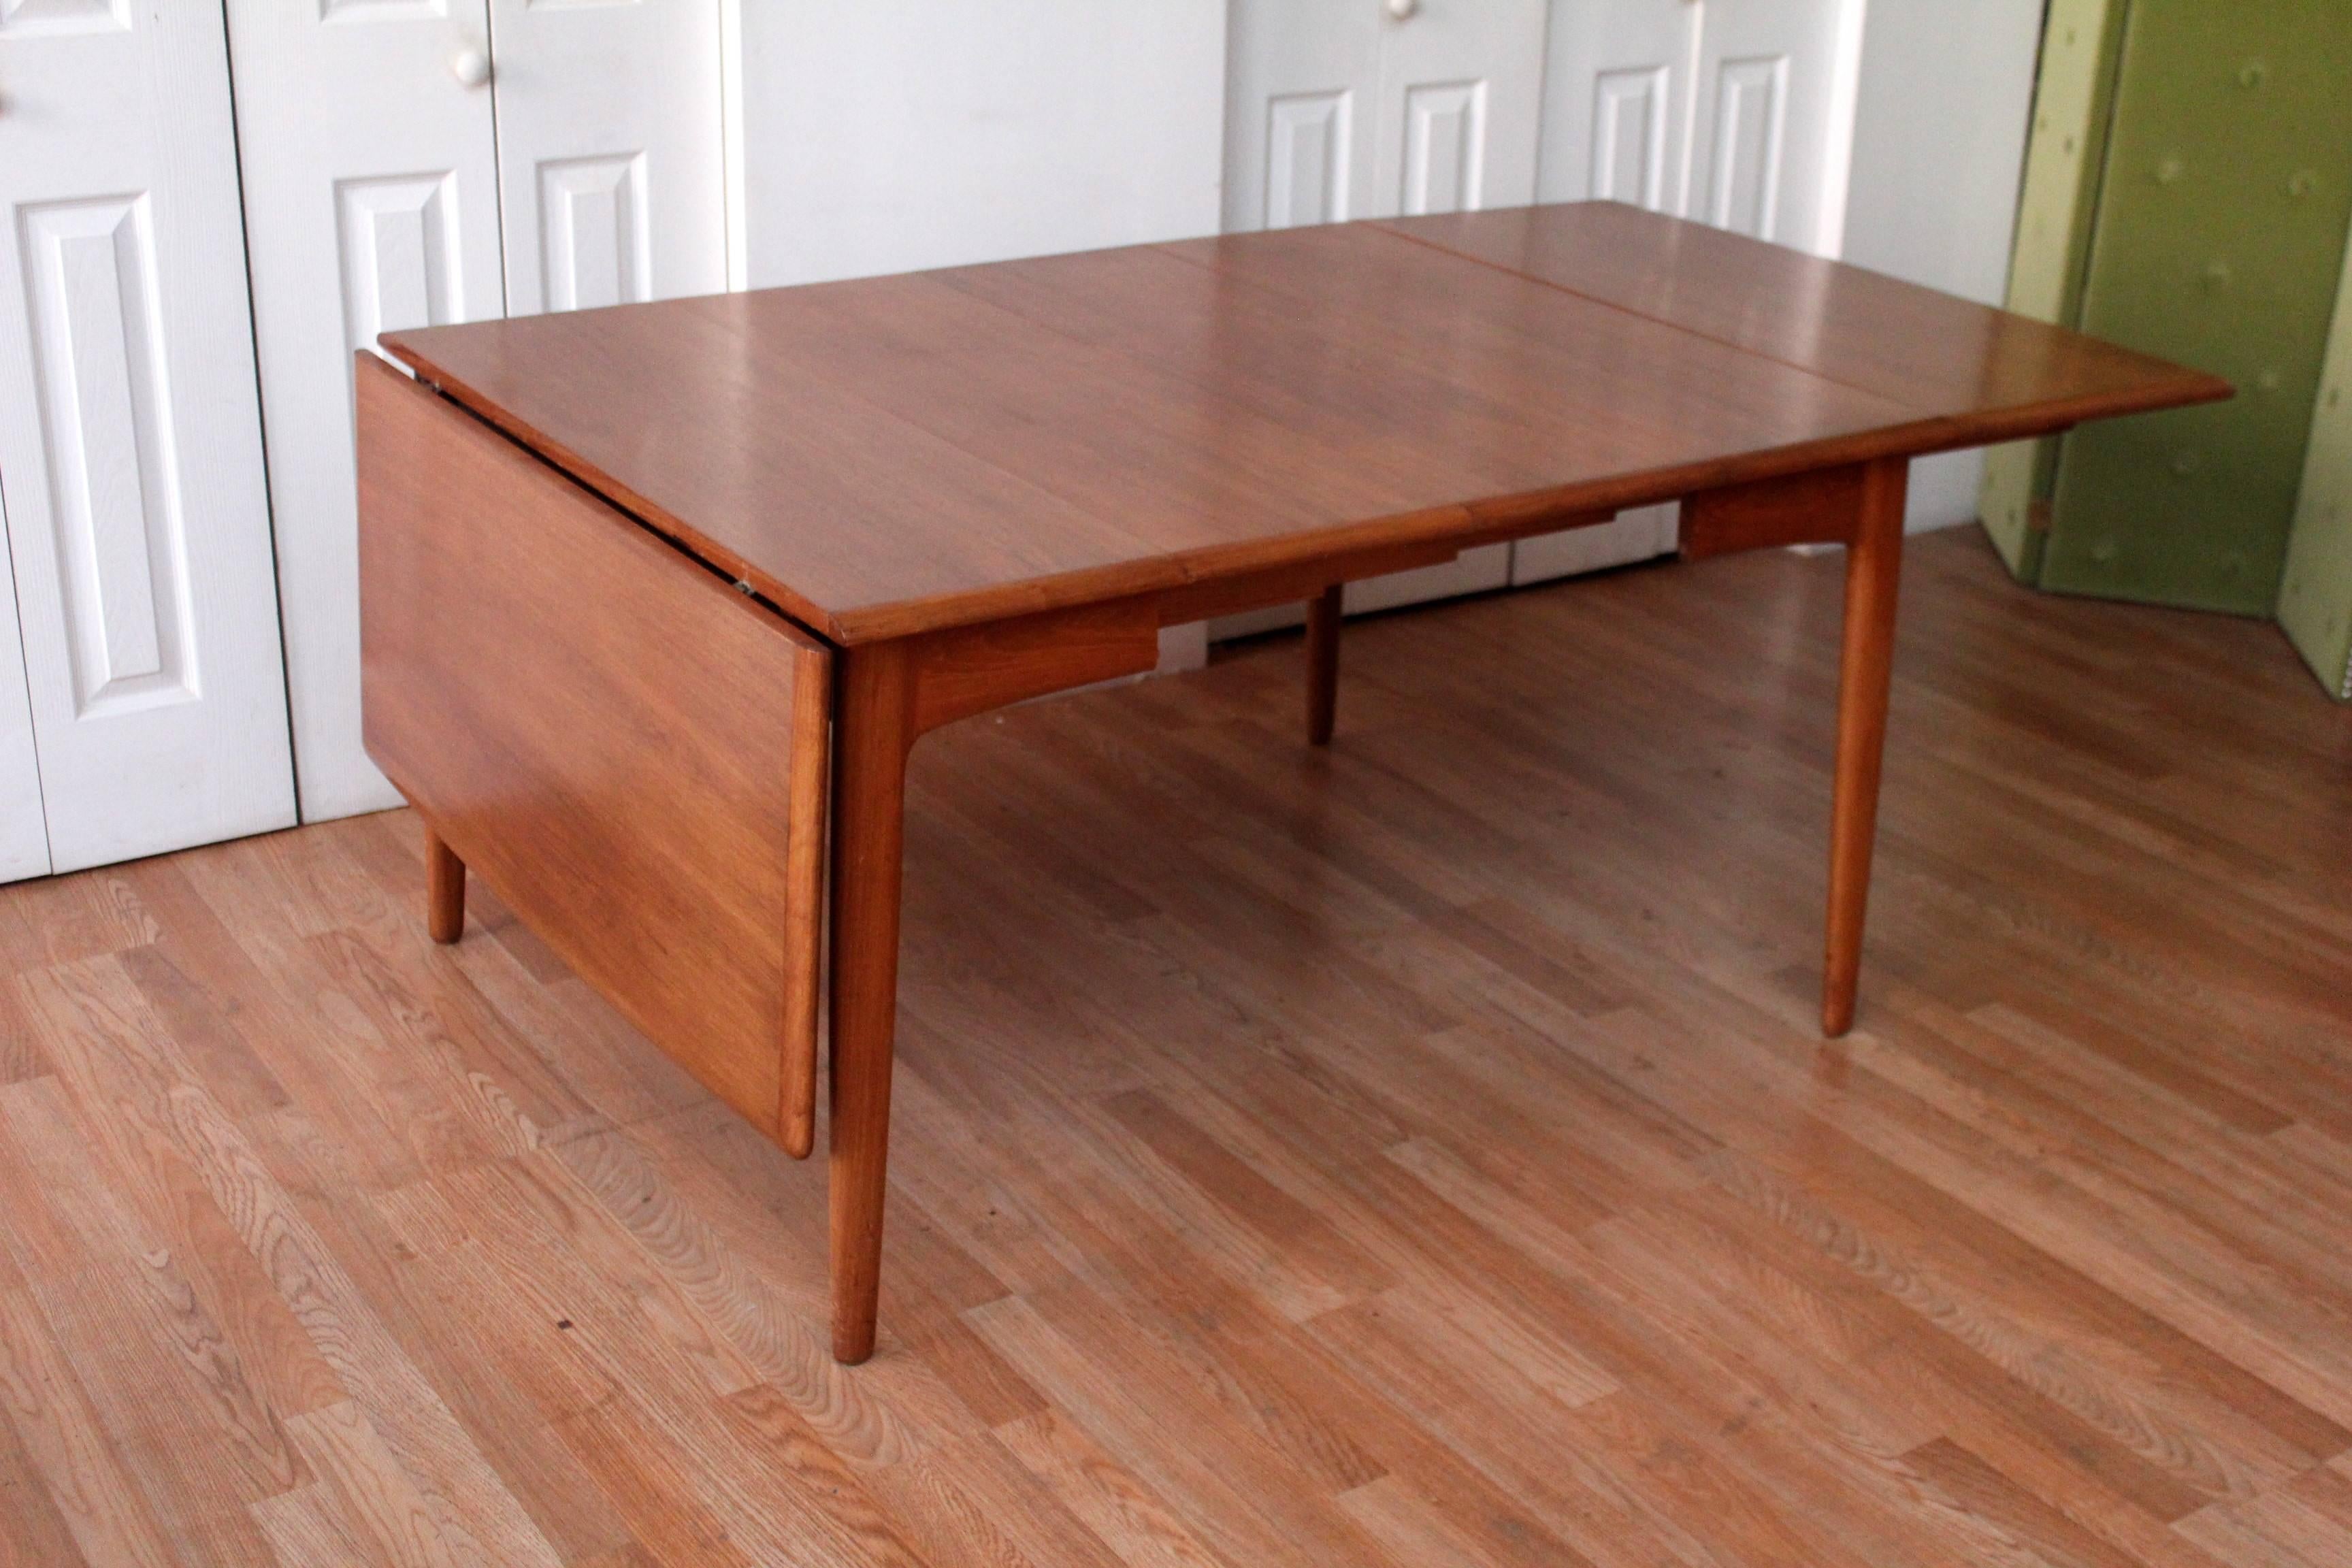 Pettiest teak patina to date! 

Danish drop-leaf table by Svend Madsen, comes resplendent with two leaves. Danish dining table with two leaves,
Perfect space saver for a small space yet perfect for entertaining due to the flexibility of this